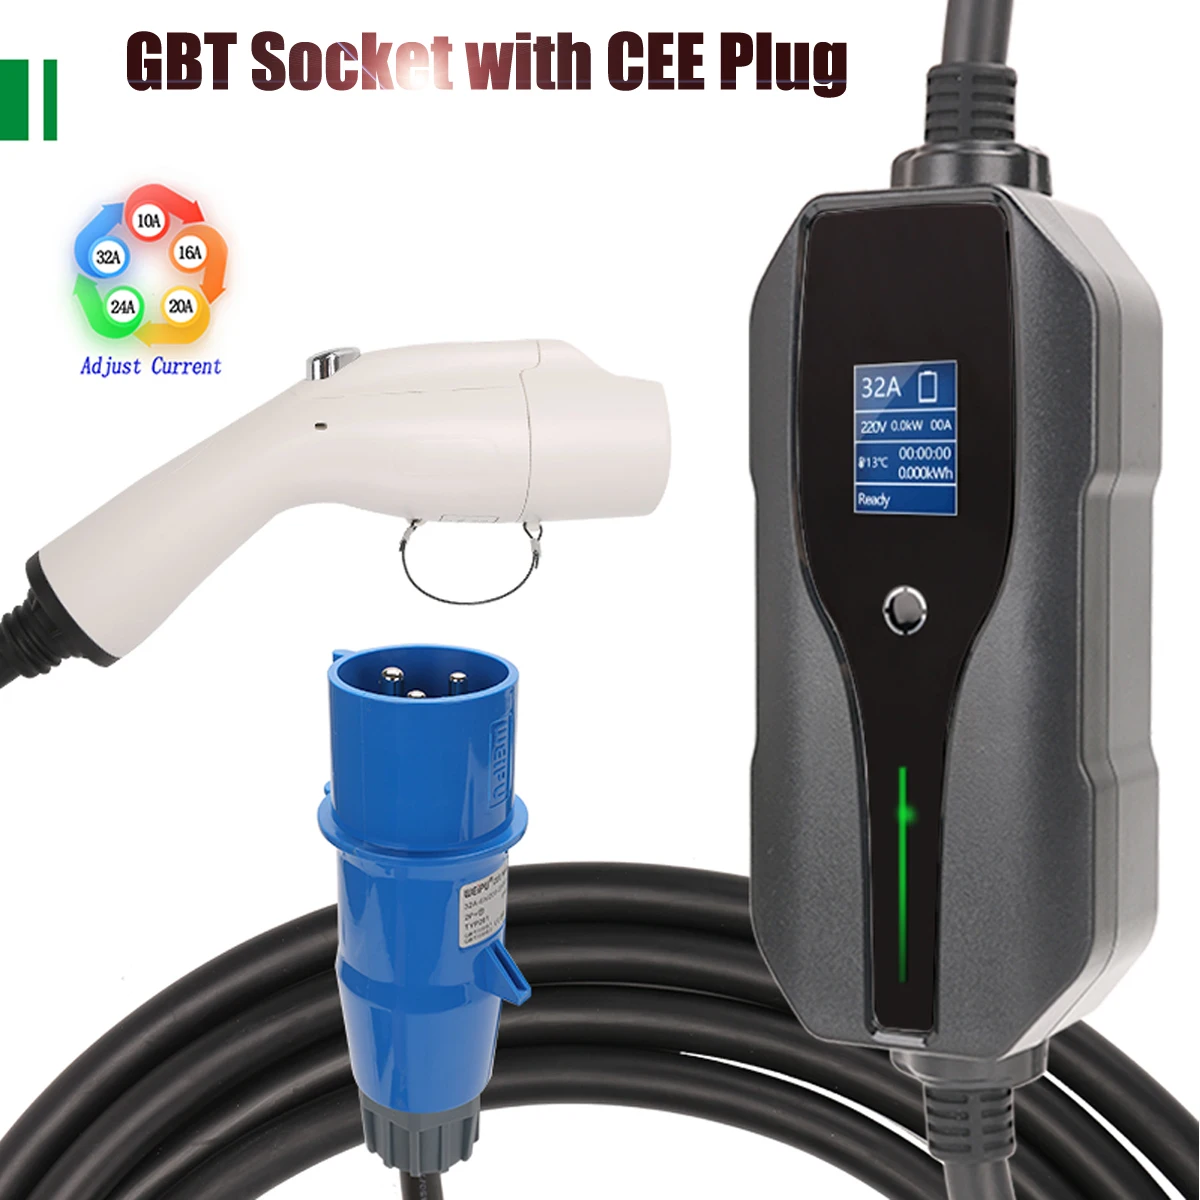 

GBT GB/T Level 2 With CEE Wall Plug Adjustable 32A 5m 7.4KW EV Charger station EVSE for Electric Vehicle Car Charger Station